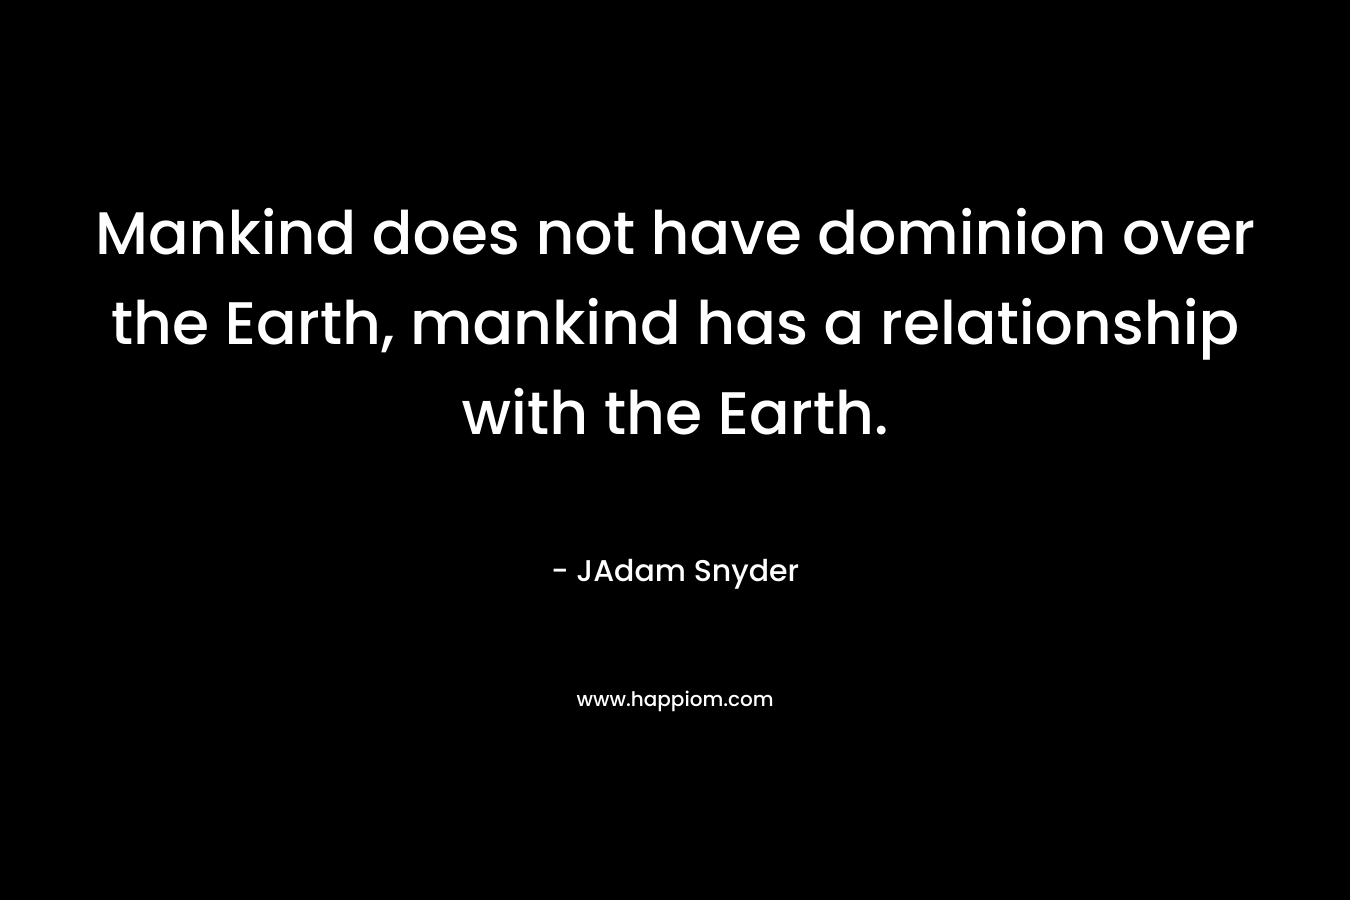 Mankind does not have dominion over the Earth, mankind has a relationship with the Earth.